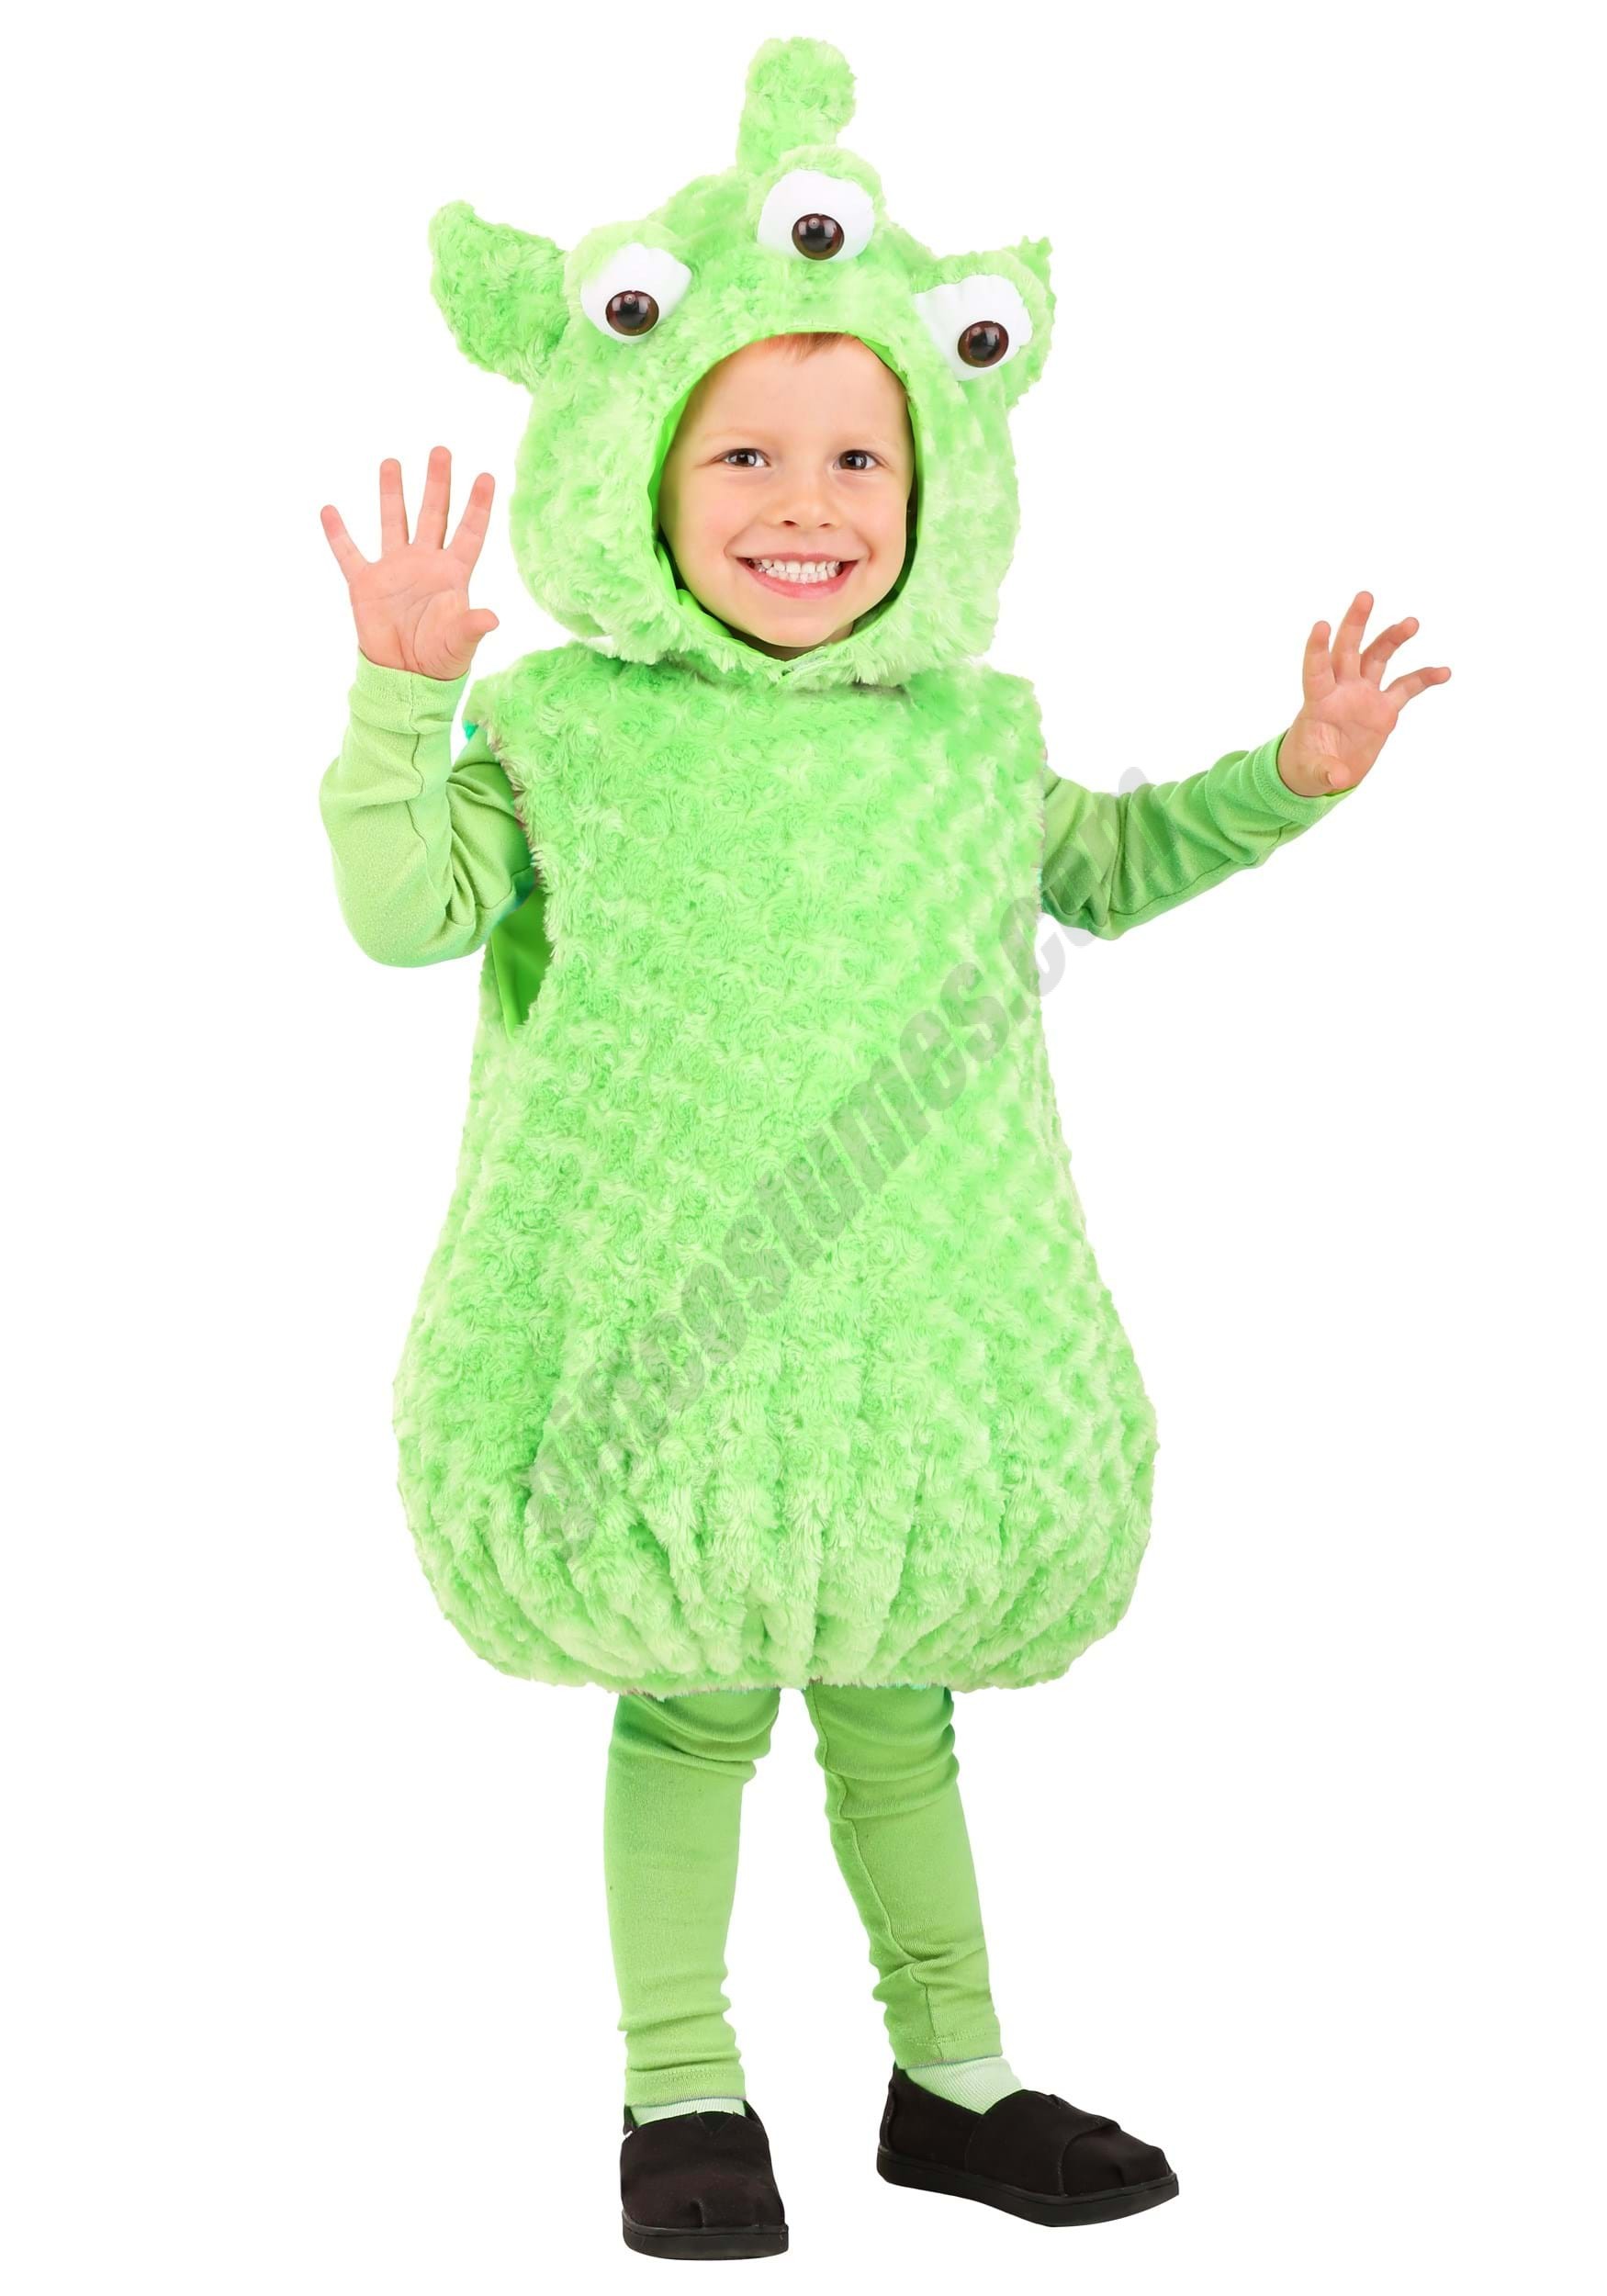 Alien Costume for Toddlers Promotions - Alien Costume for Toddlers Promotions